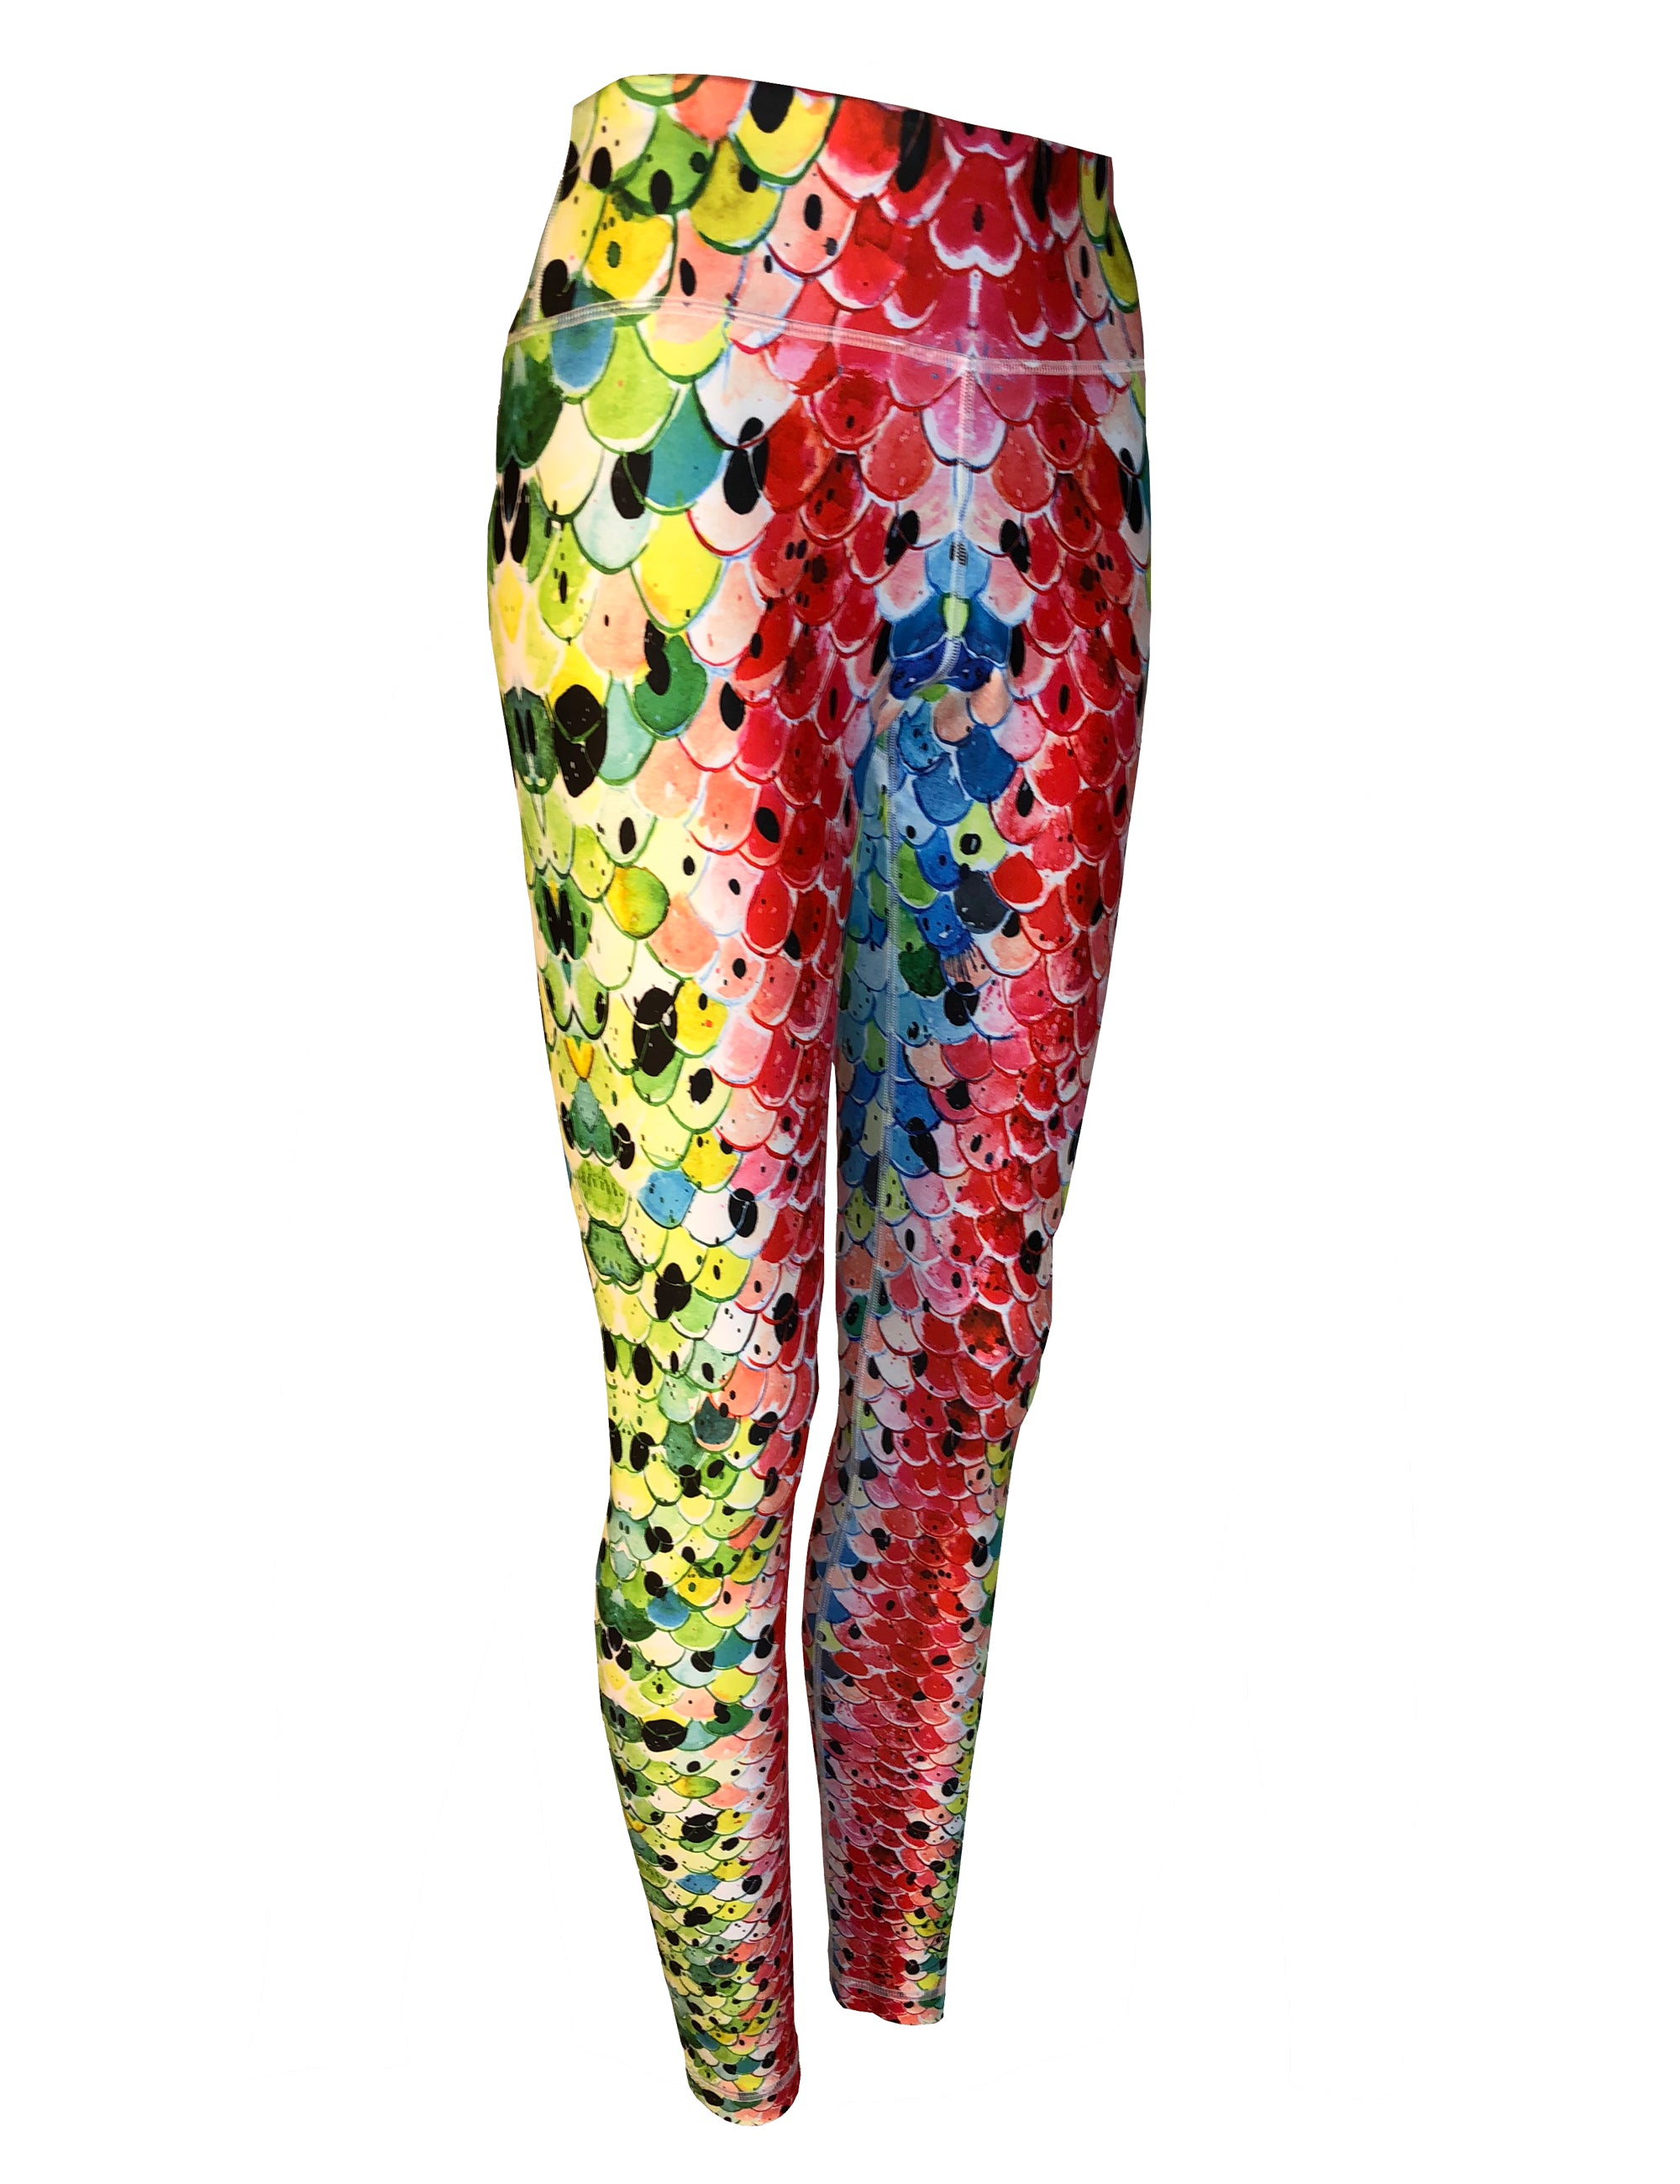 Fincognito All Sport Leggings Womens Rainbow Trout 2 Fish Print Fly Fishing